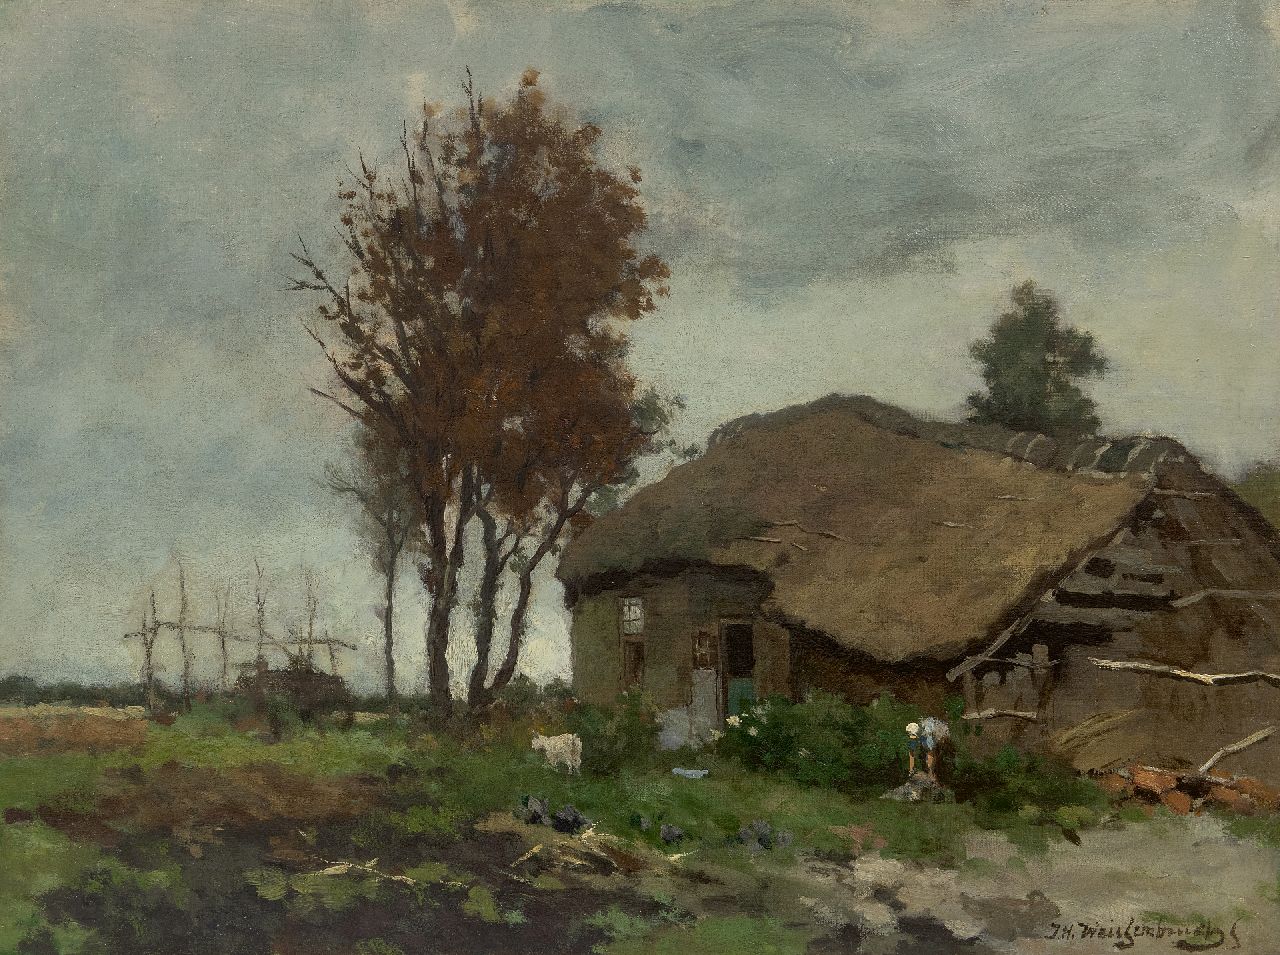 Weissenbruch H.J.  | Hendrik Johannes 'J.H.' Weissenbruch | Paintings offered for sale | The old farm, oil on canvas 45.8 x 60.8 cm, signed l.r.